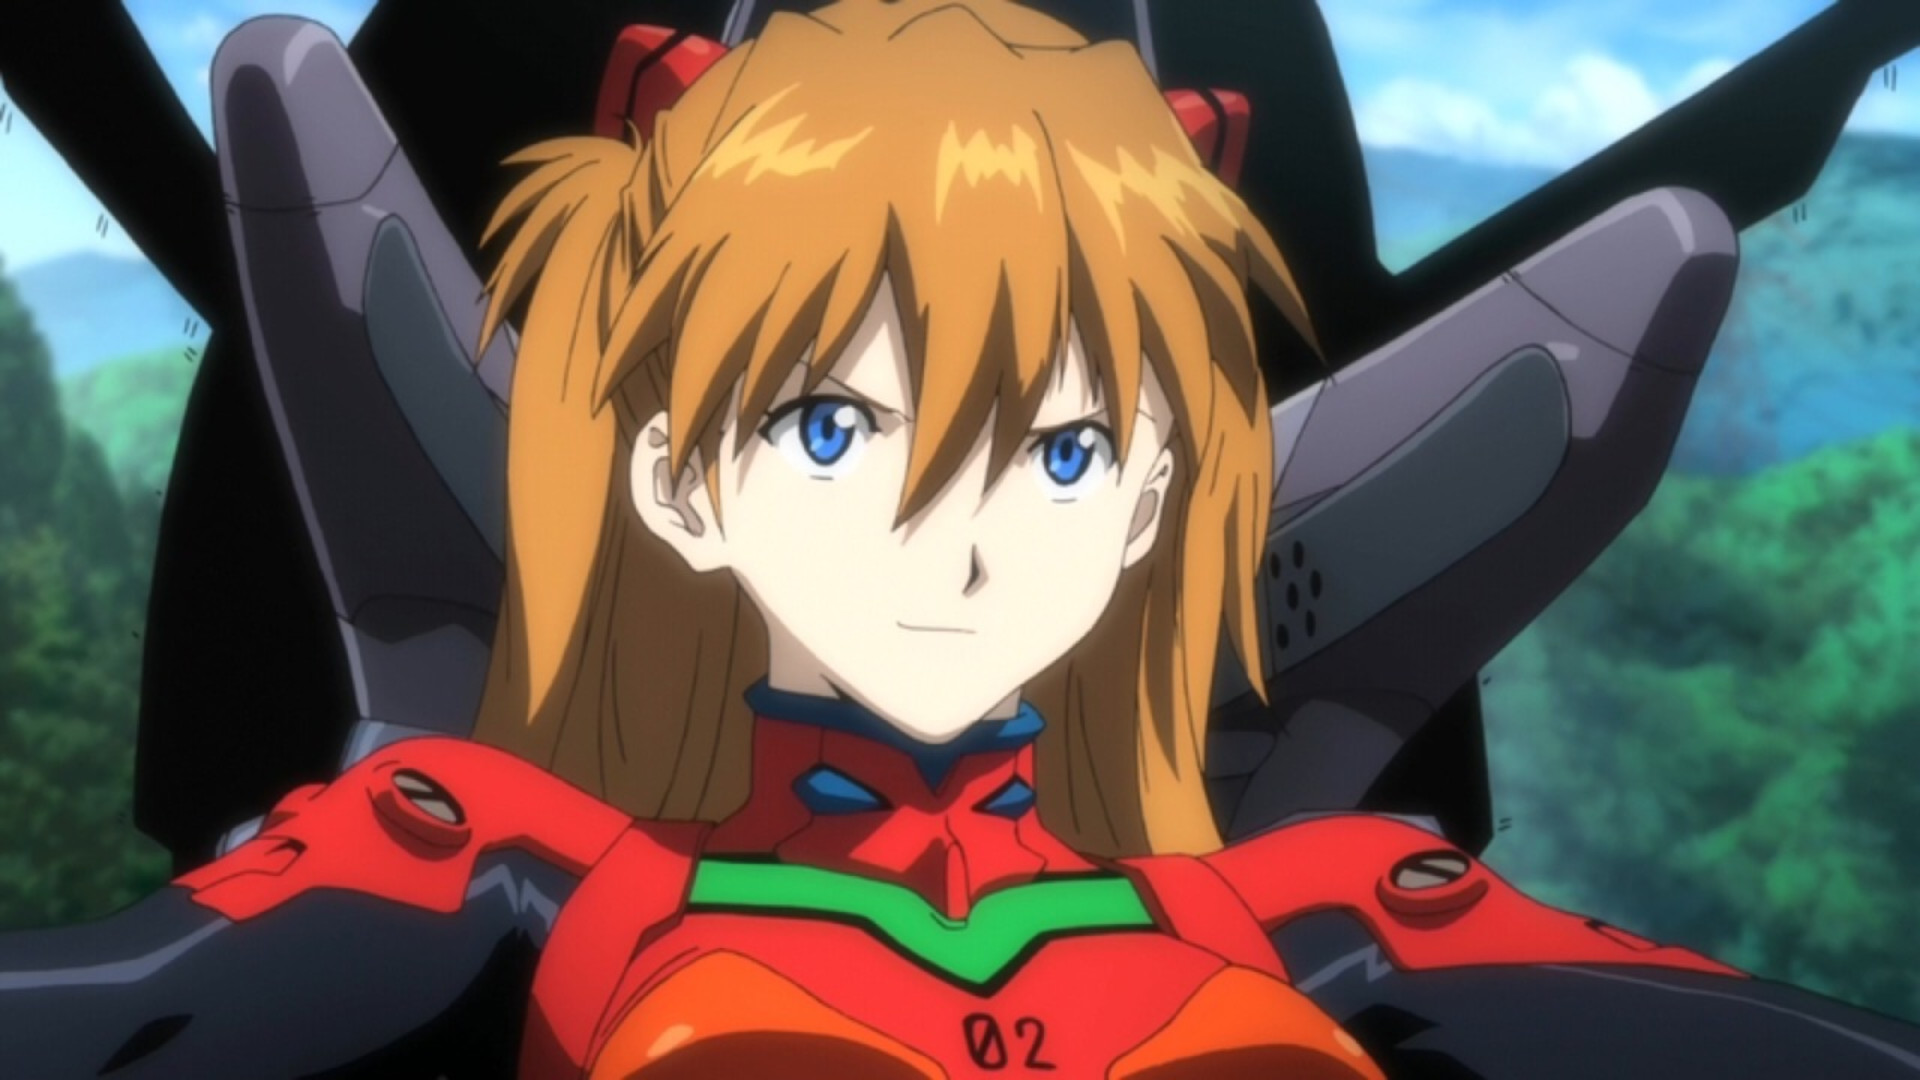 How to watch Neon Genesis Evangelion in order – including the Rebuild movies